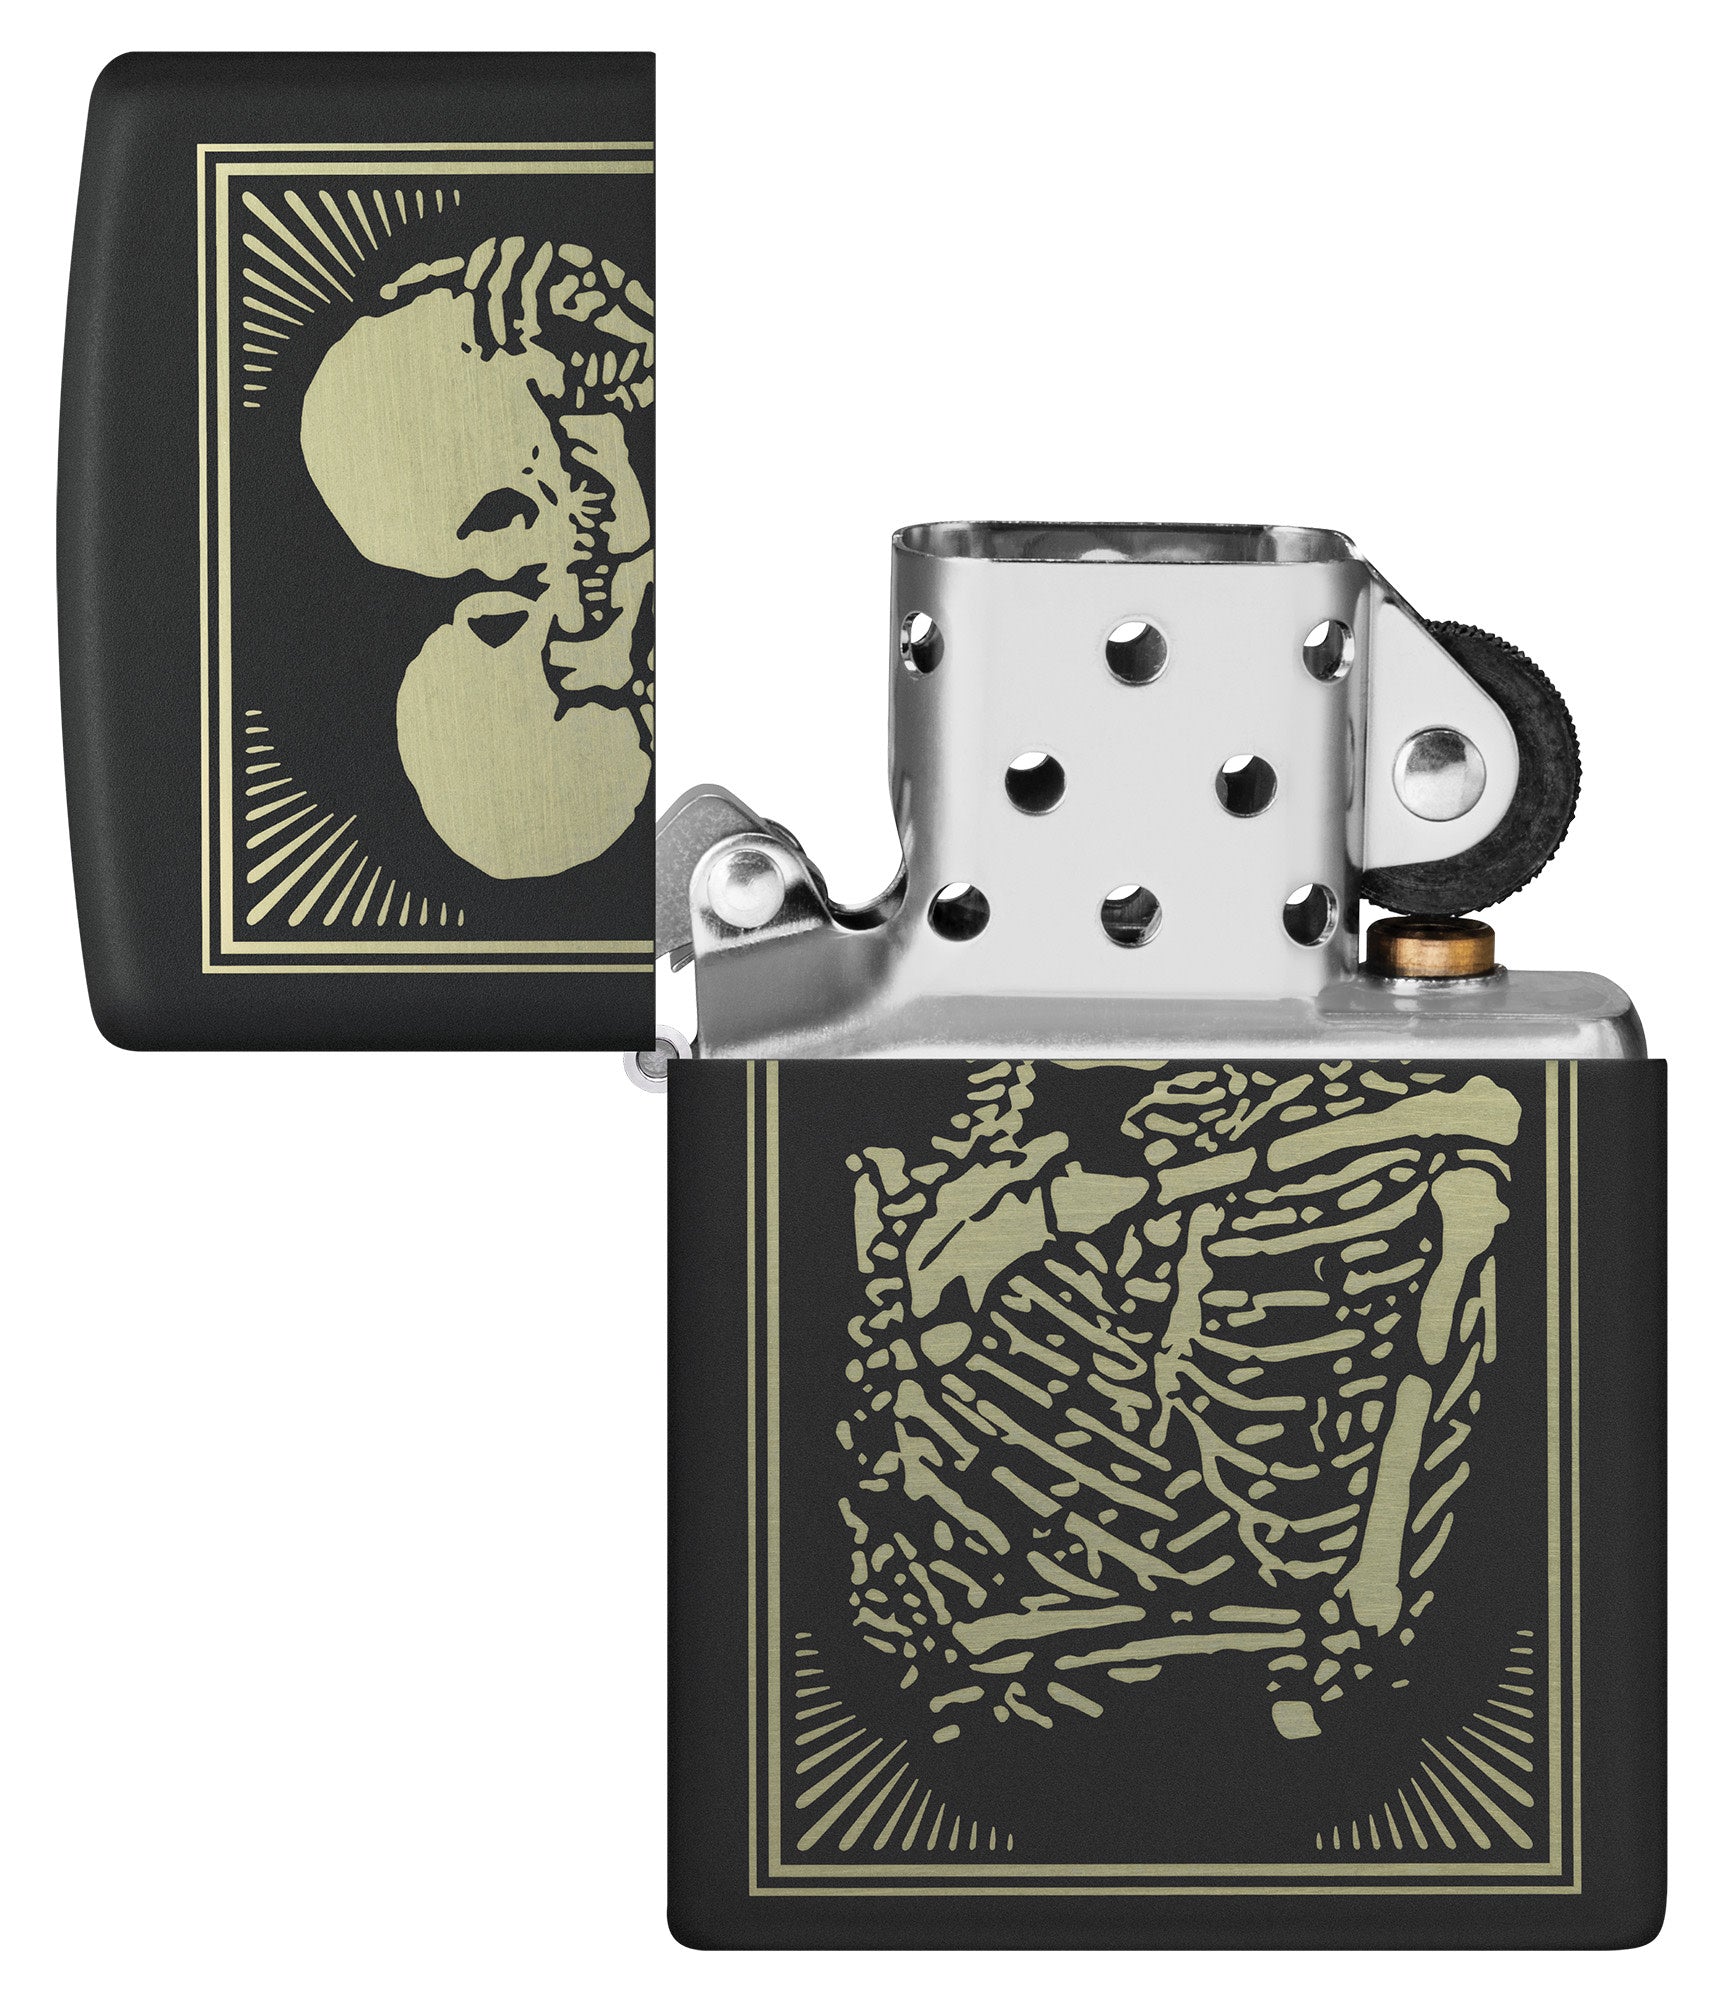 Lovers Design Black Matte Windproof Lighter with its lid open and unlit.